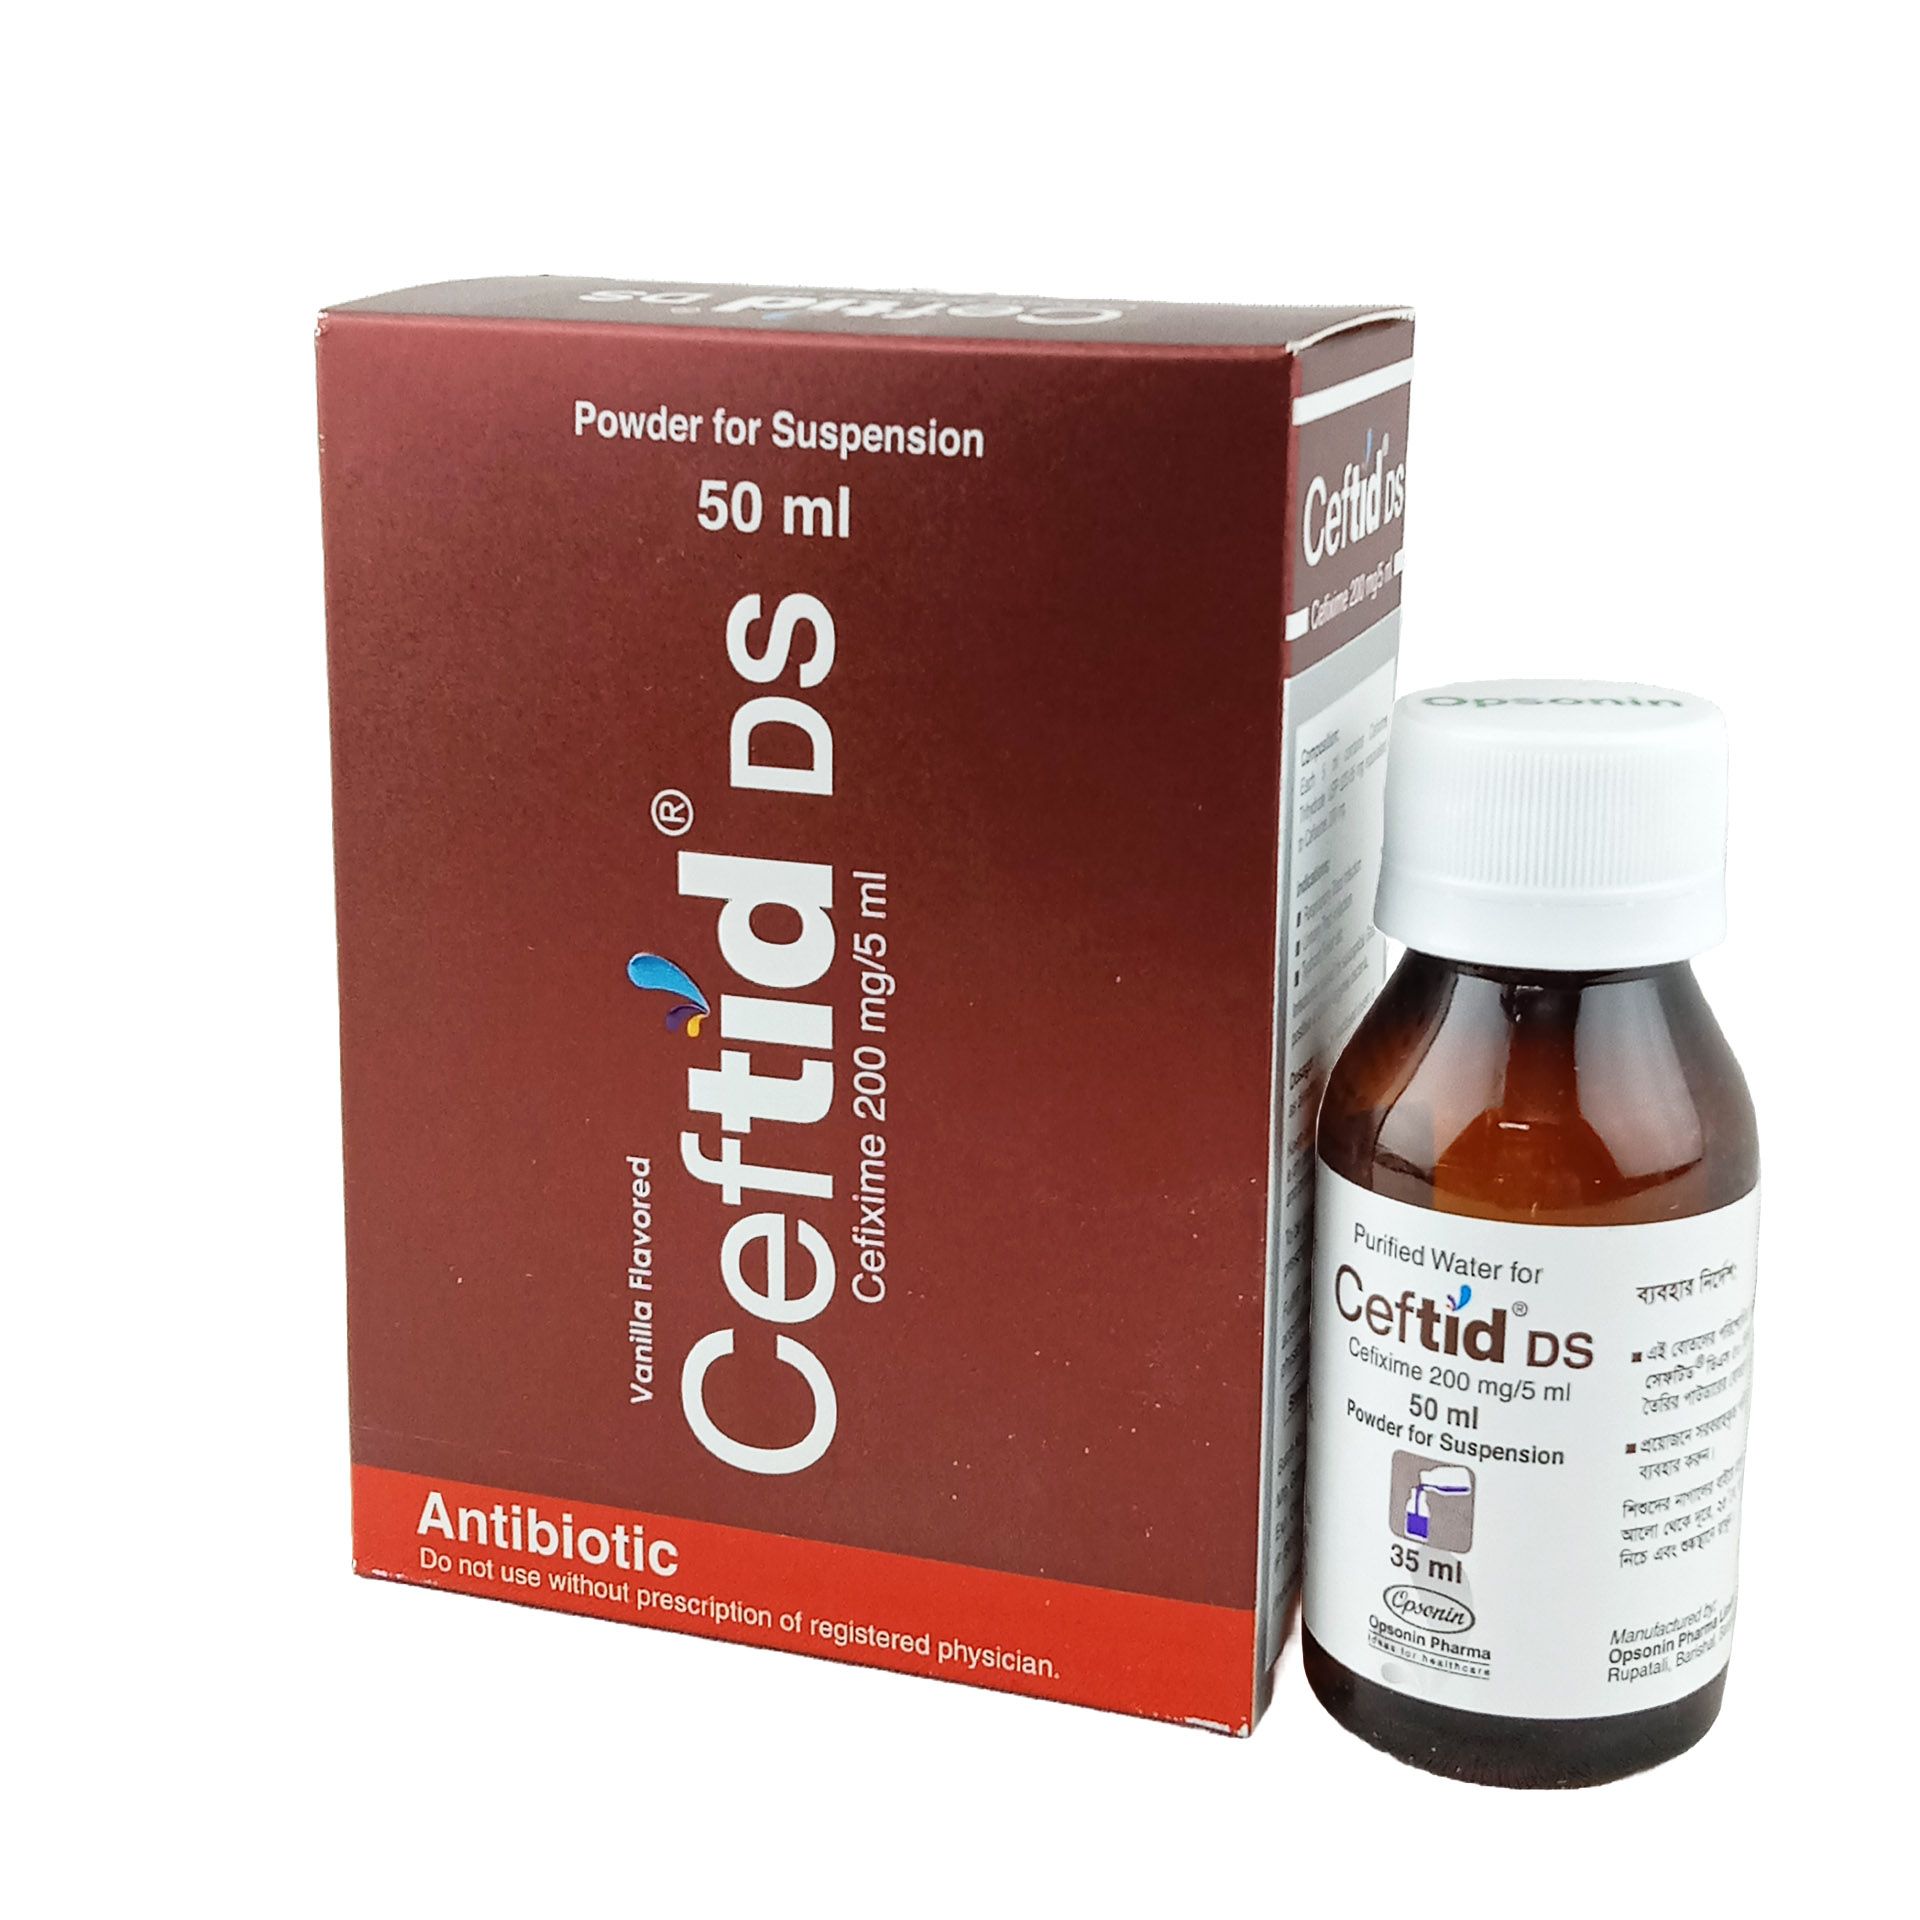 Ceftid DS 200mg/5ml Powder for Suspension